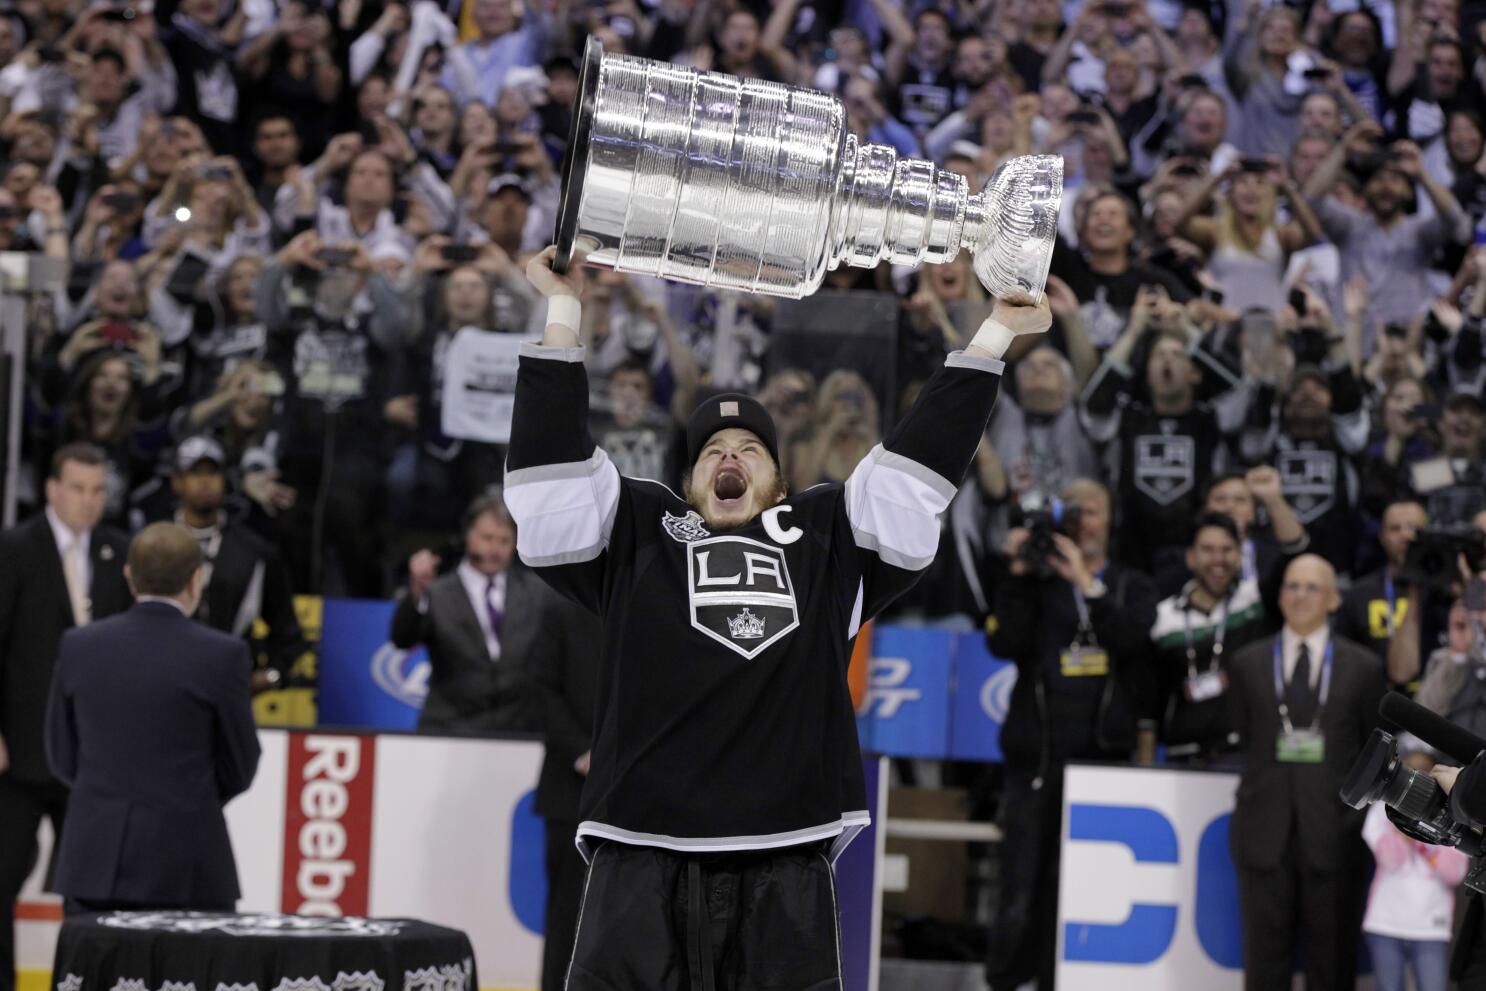 Dustin Brown holds up The Stanley Cup at an event where LA Kings